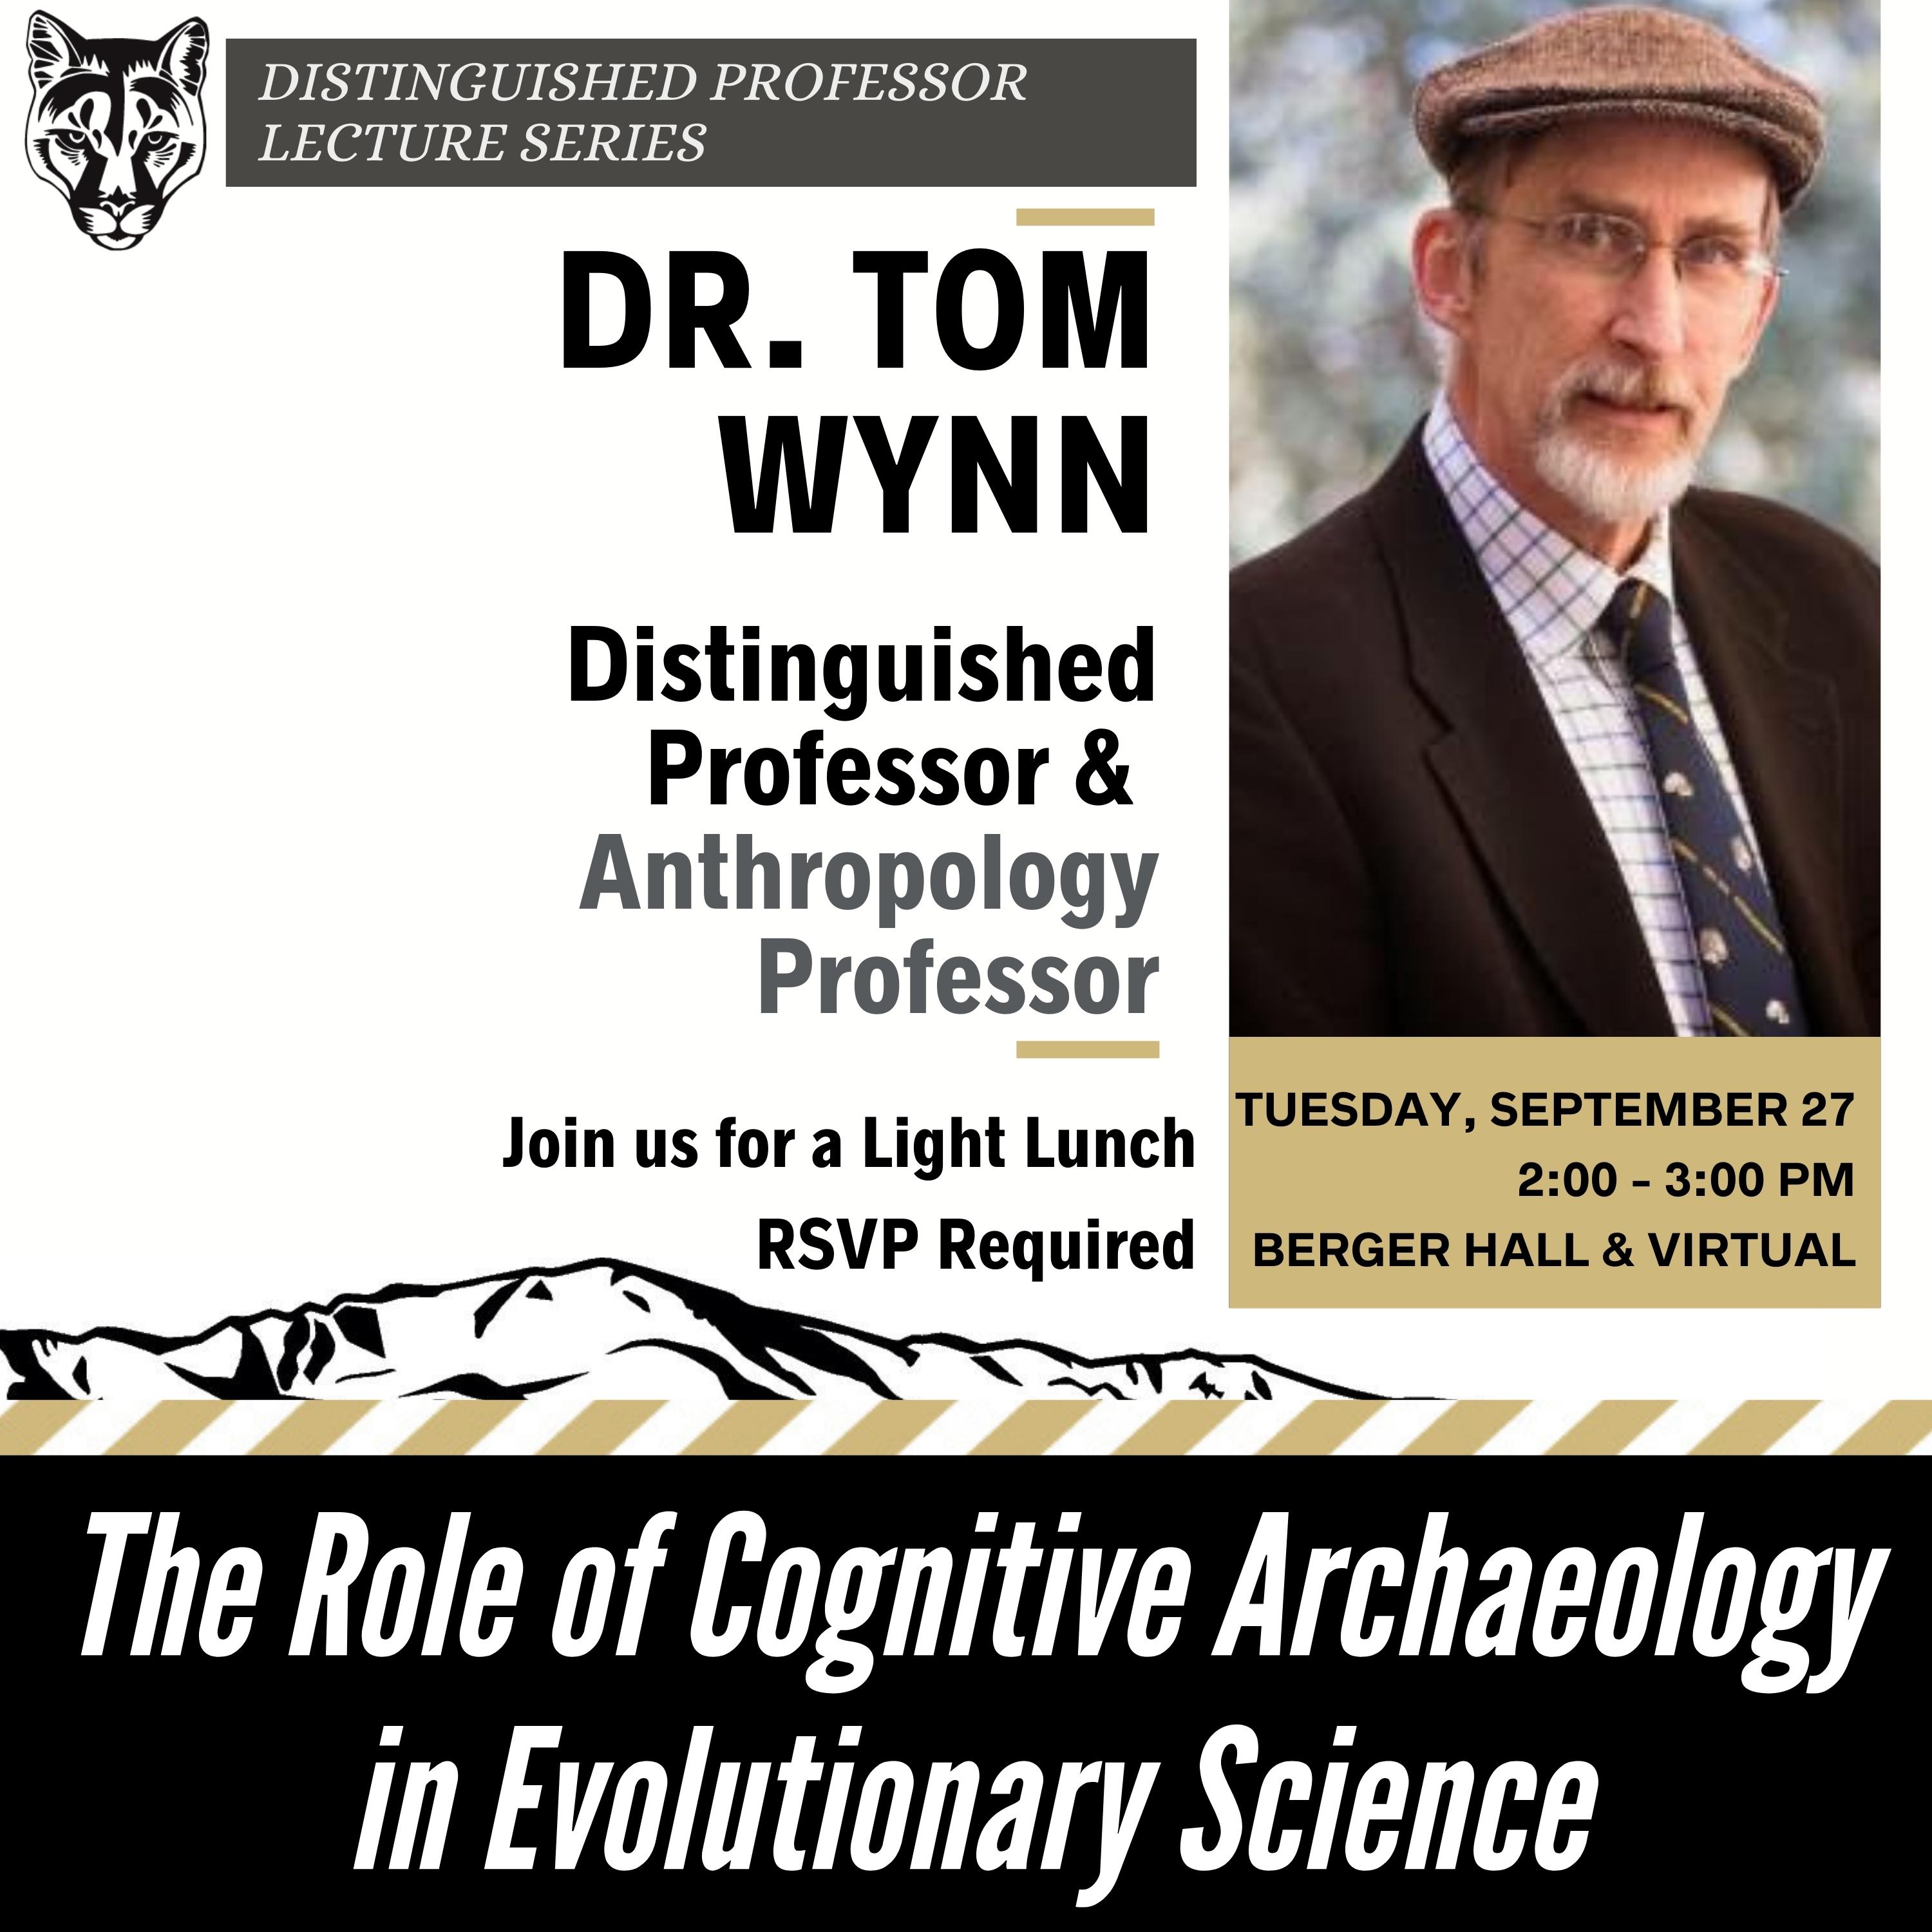 Photo of 2022 Distinguished Professor Lecture Series Thomas Wynn